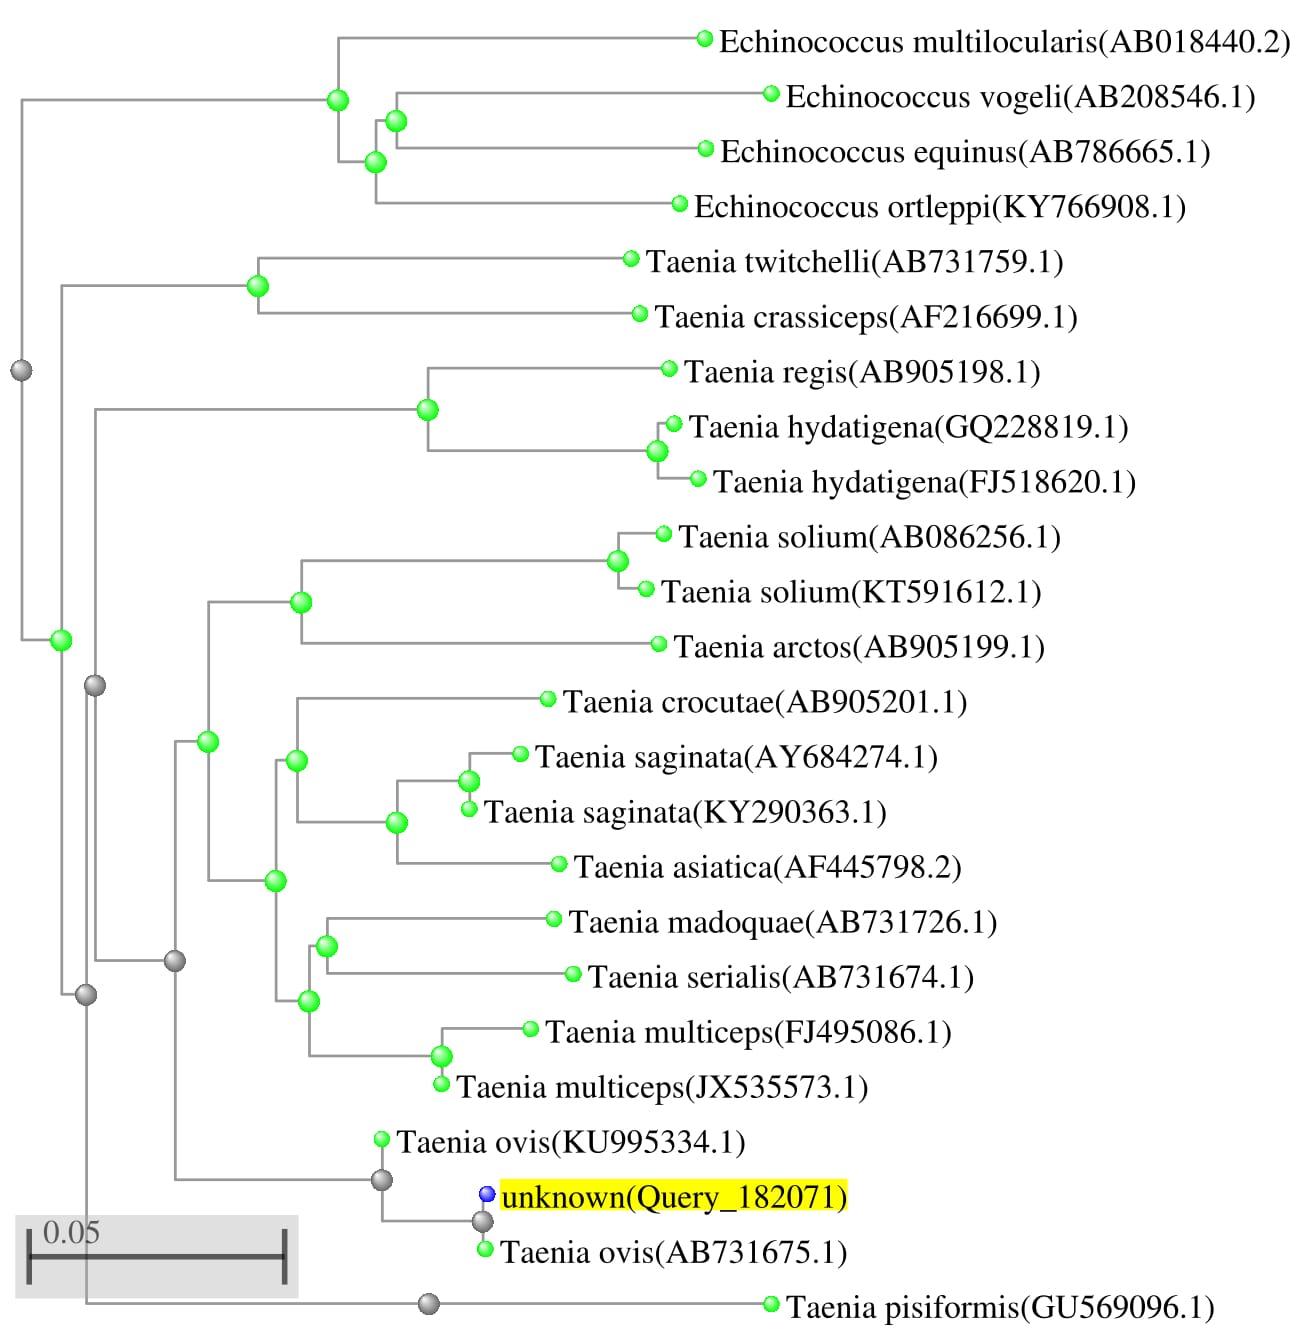 Molecular phylogenetic analysis of Cysticercus ovis from Egypt based on MT-CO1 gene sequences